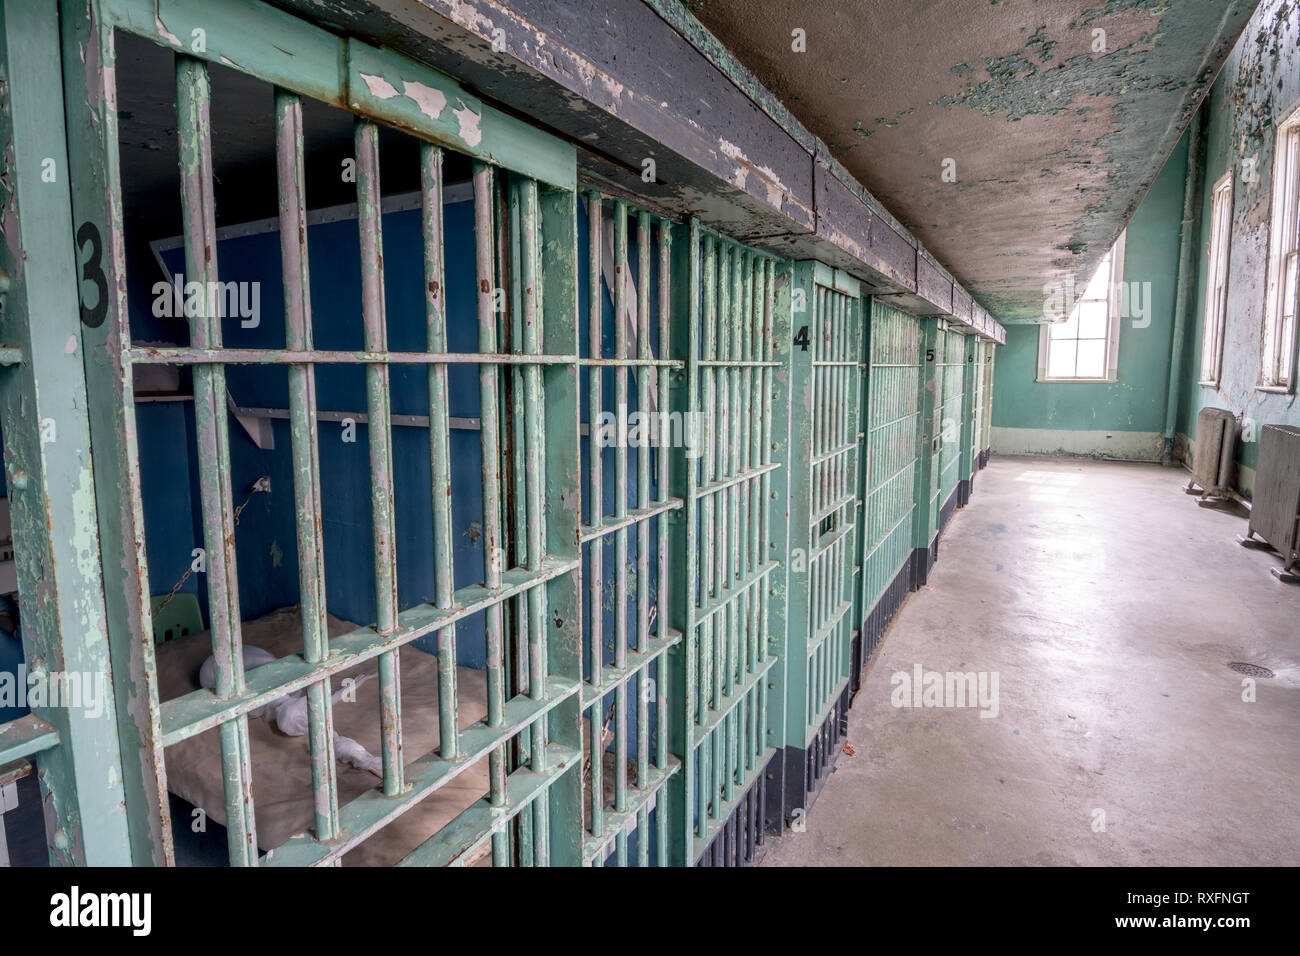 Prison Cell Block Of Jail Doors With Steel Bars Stock Photo Alamy